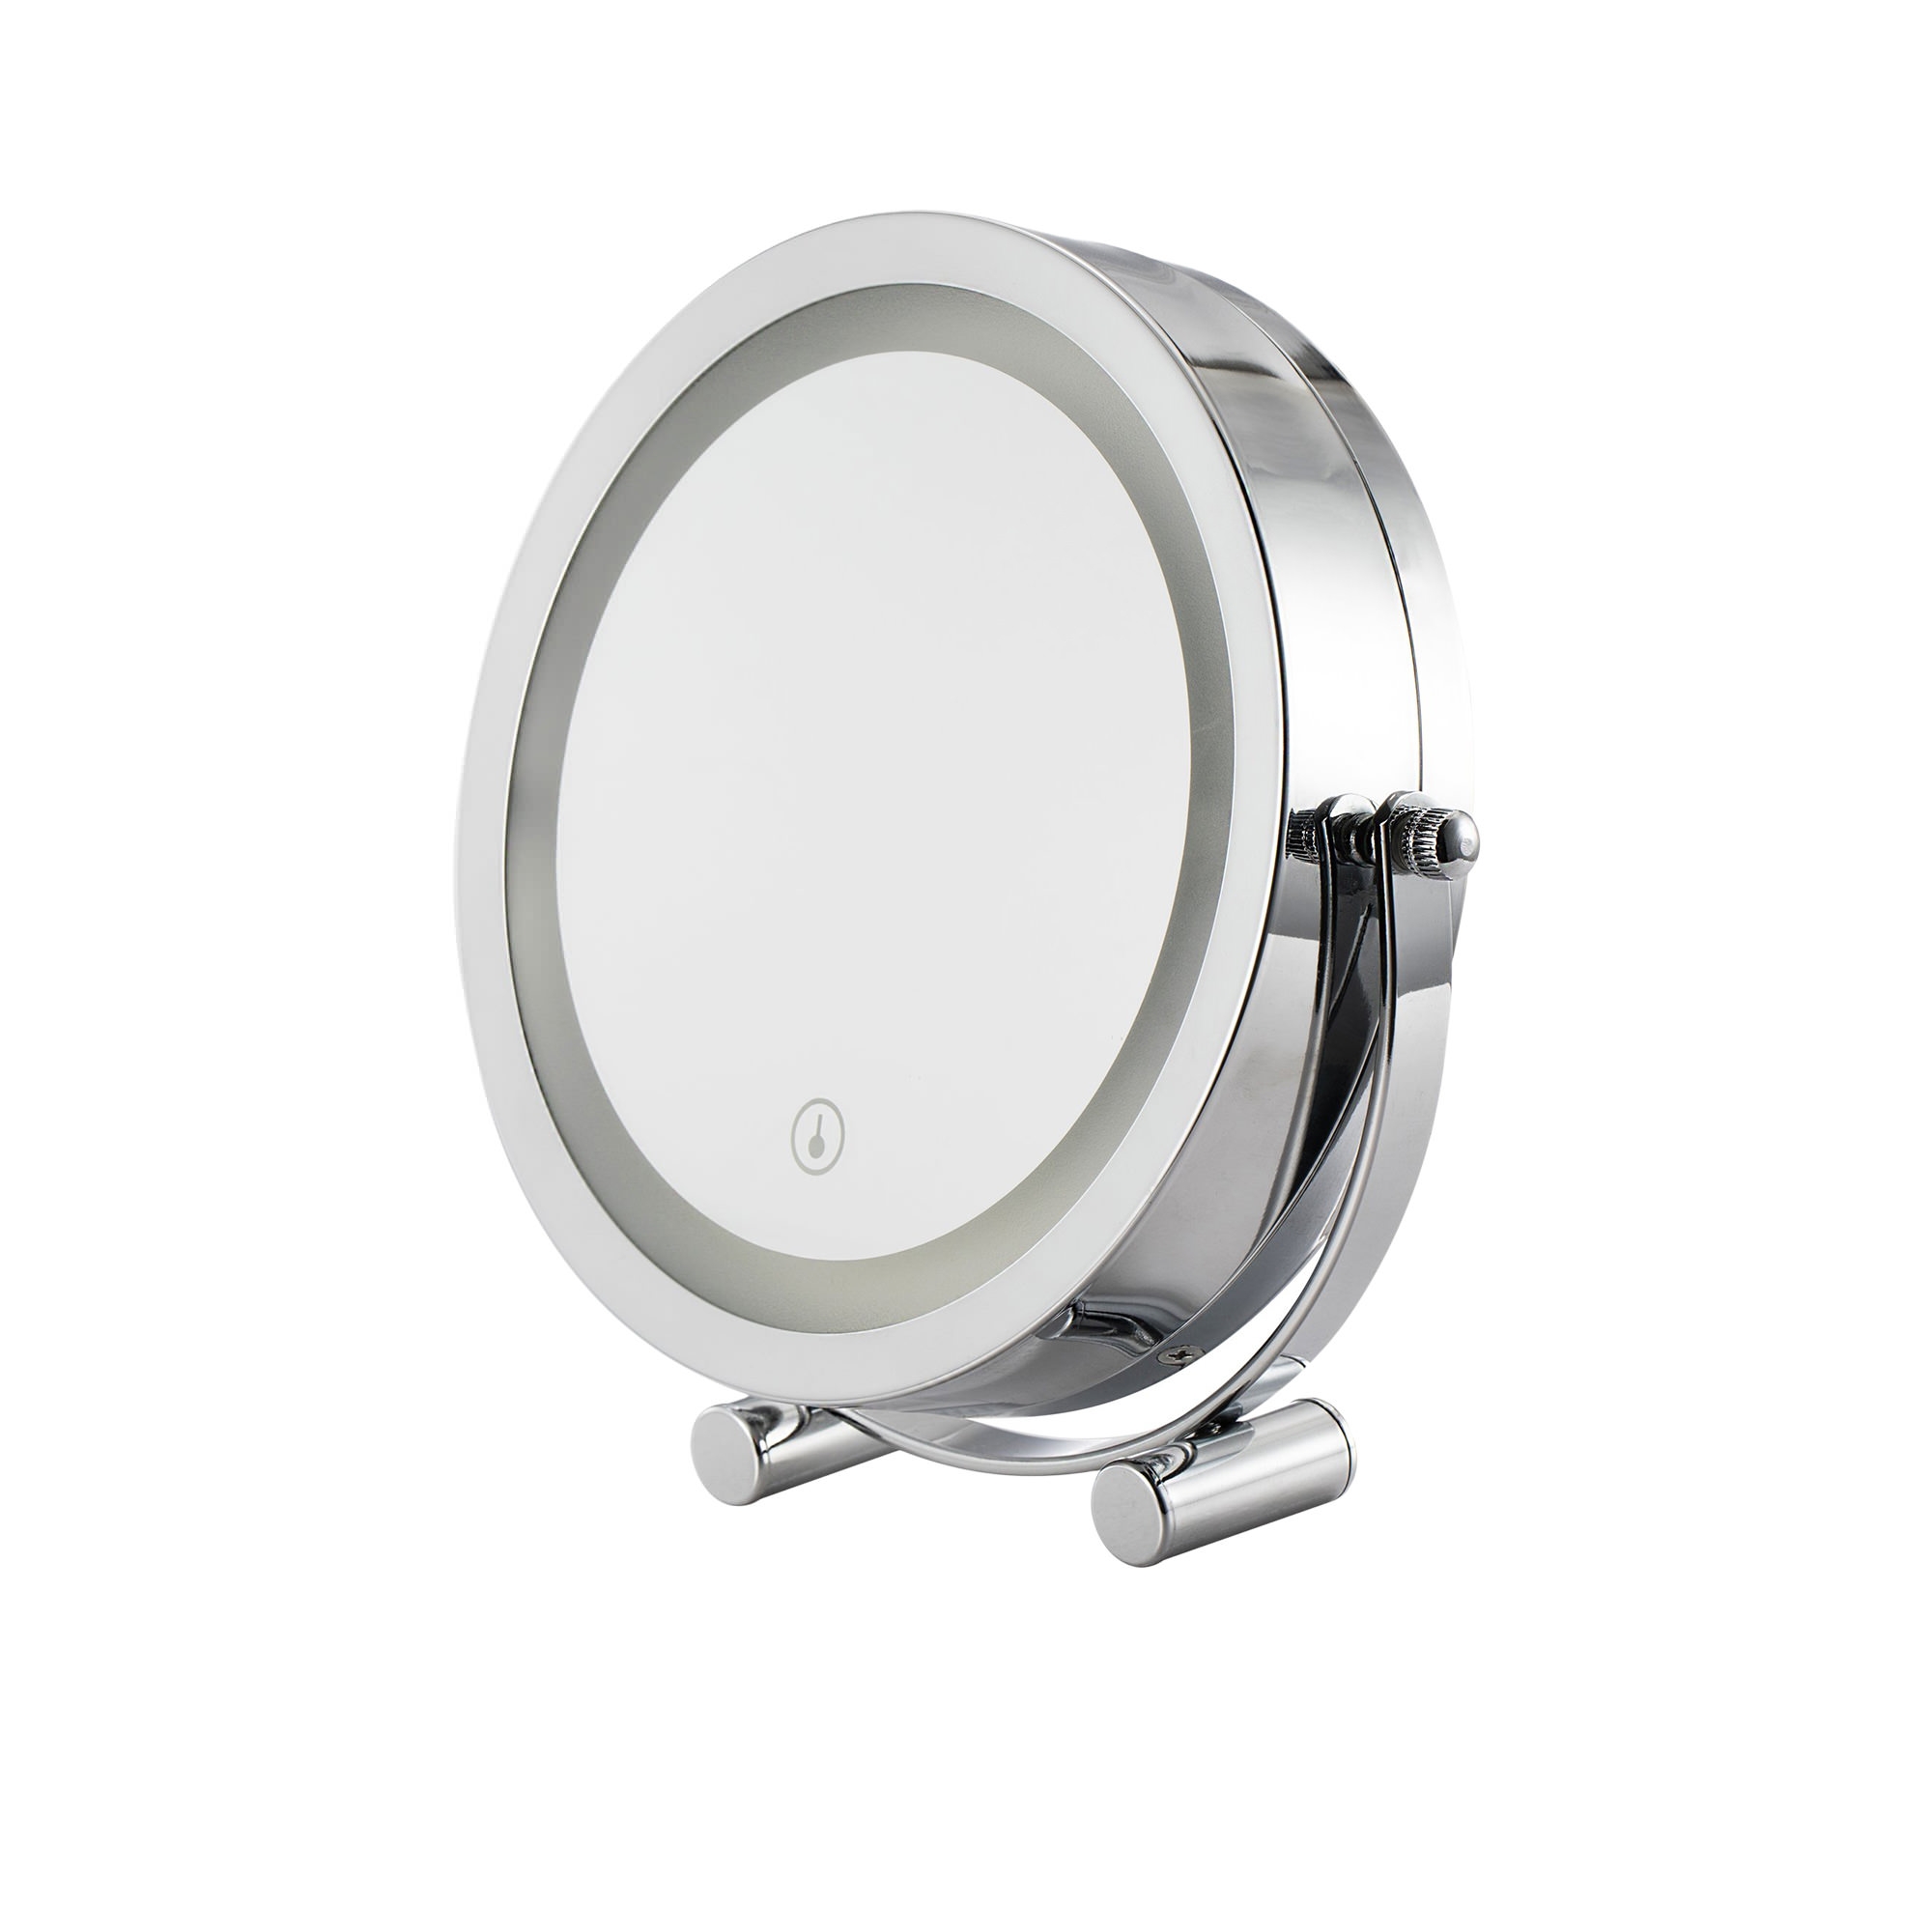 Clevinger San Marino Round Vanity Mirror with Led Lights Silver Image 1